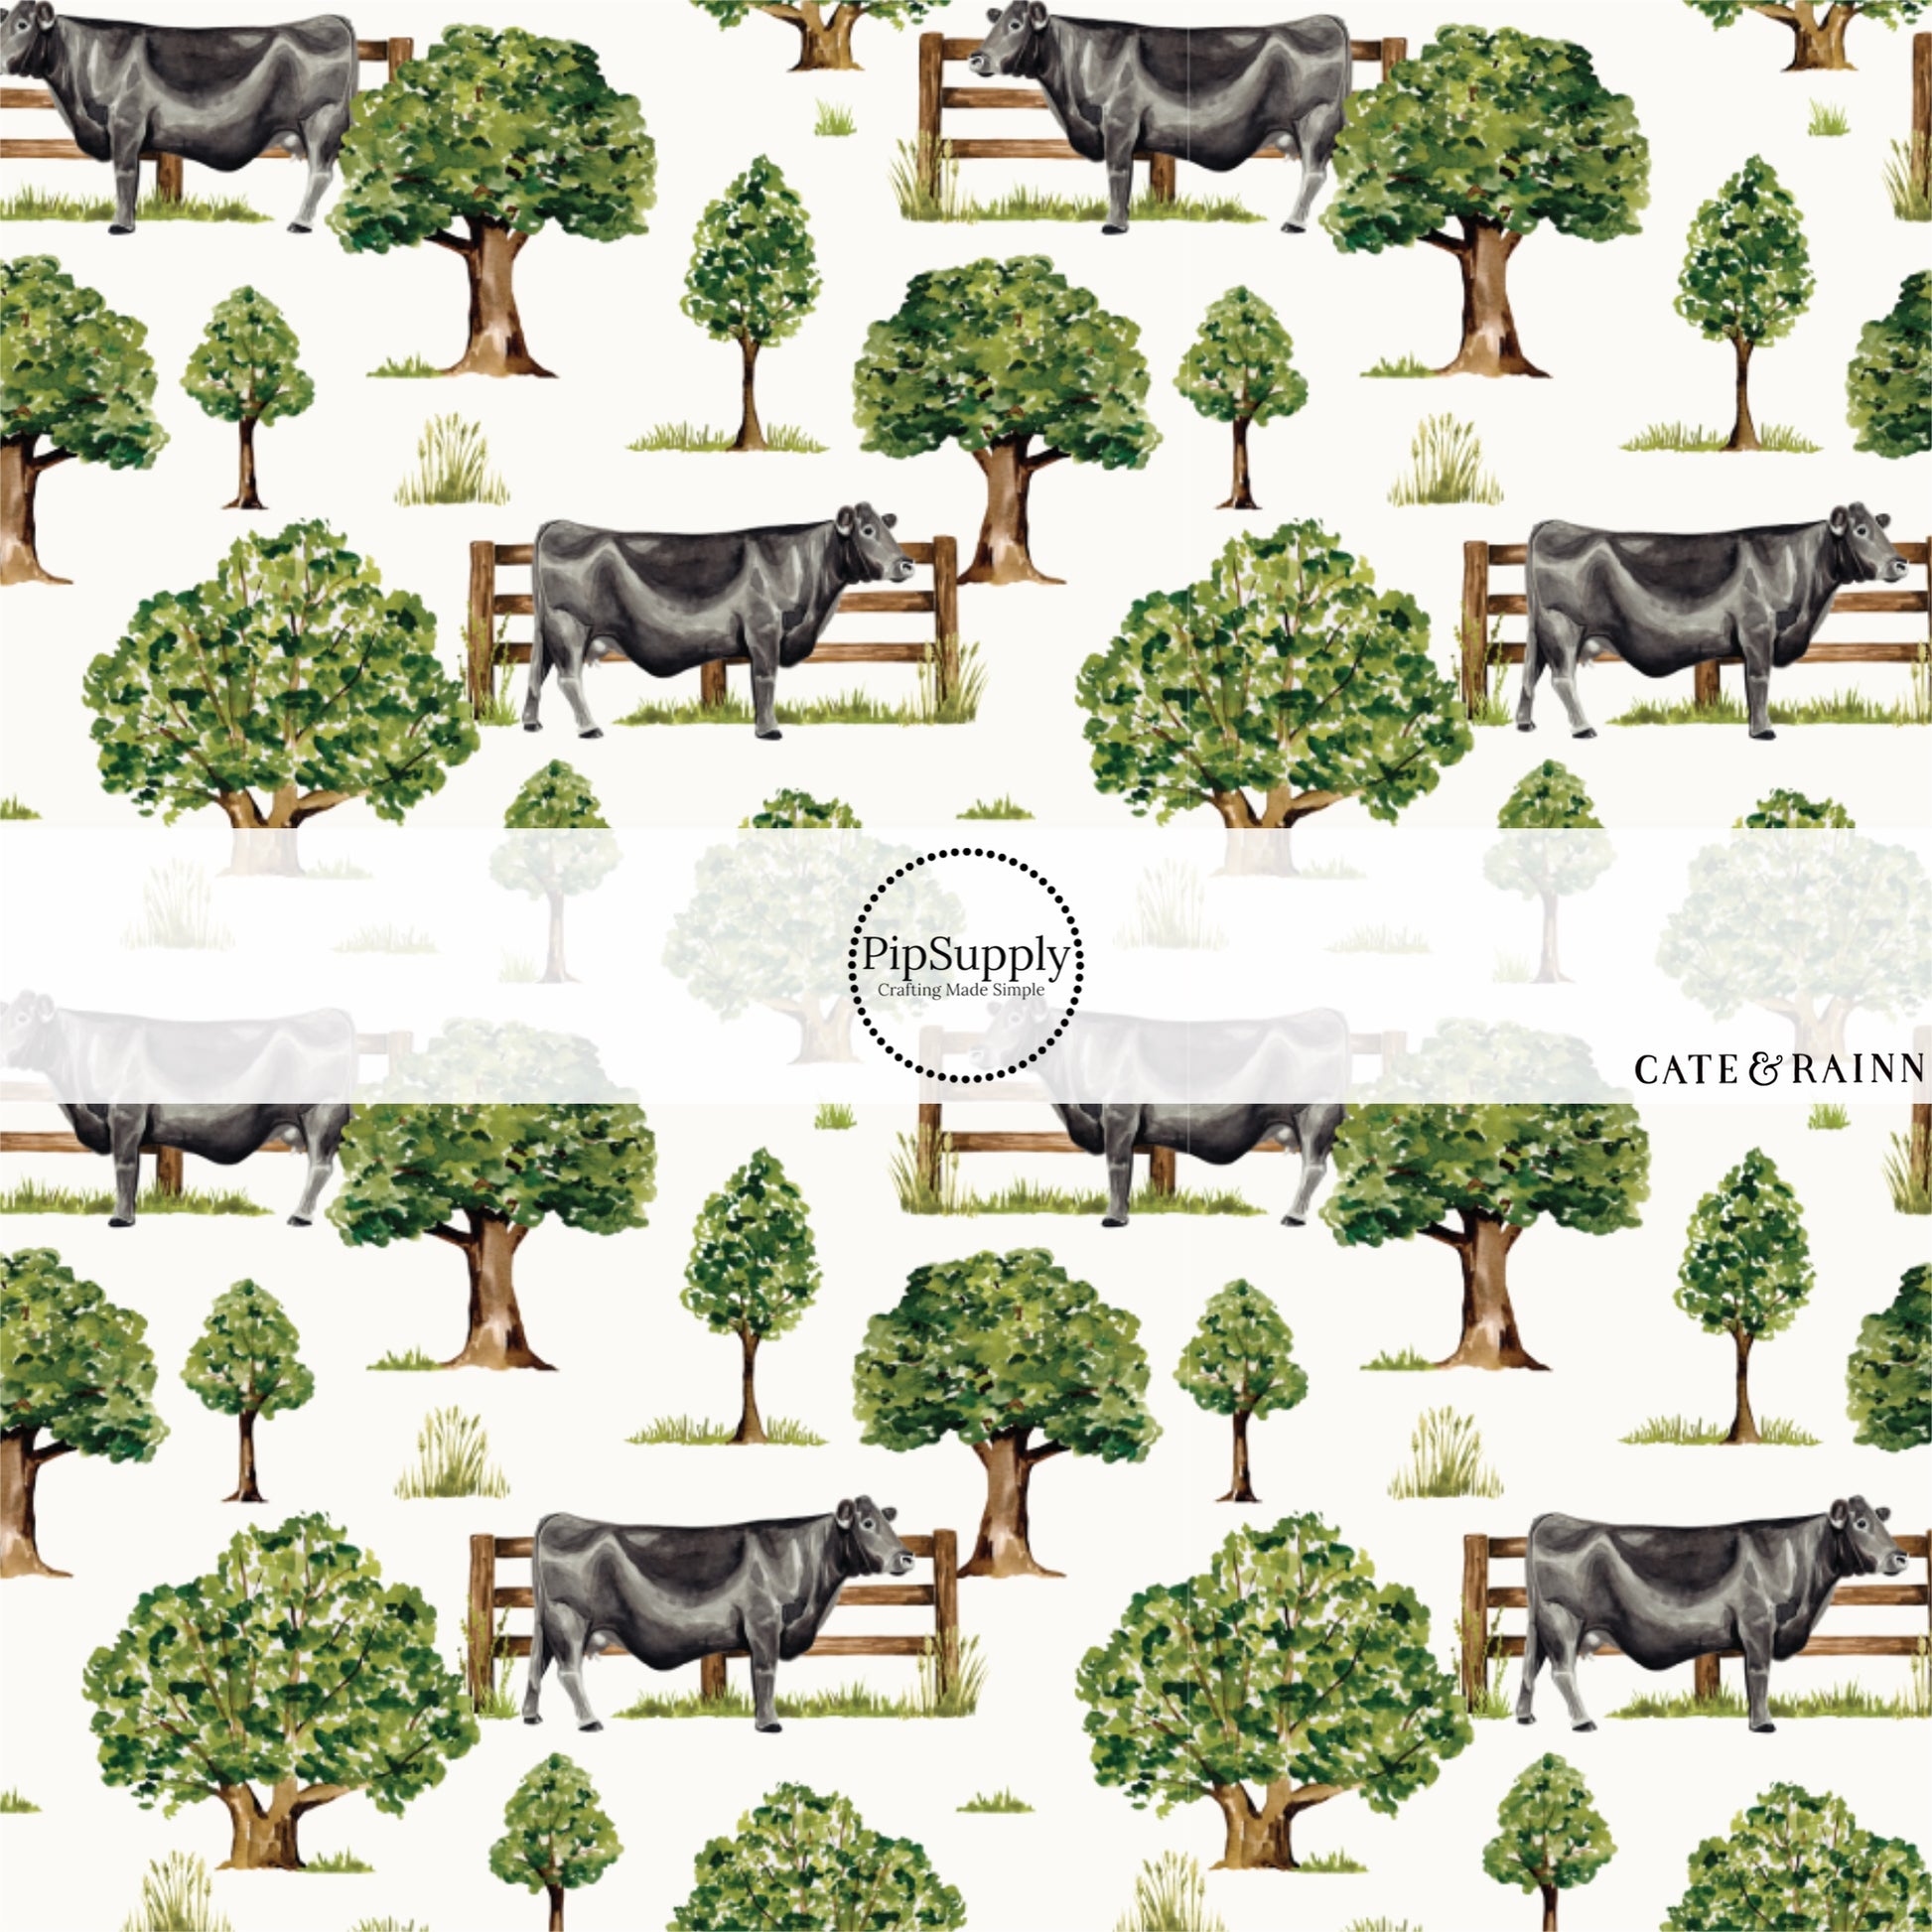 These spring and summer pattern faux leather sheets contain the following design elements: farm and meadow cows. Our CPSIA compliant faux leather sheets or rolls can be used for all types of crafting projects.